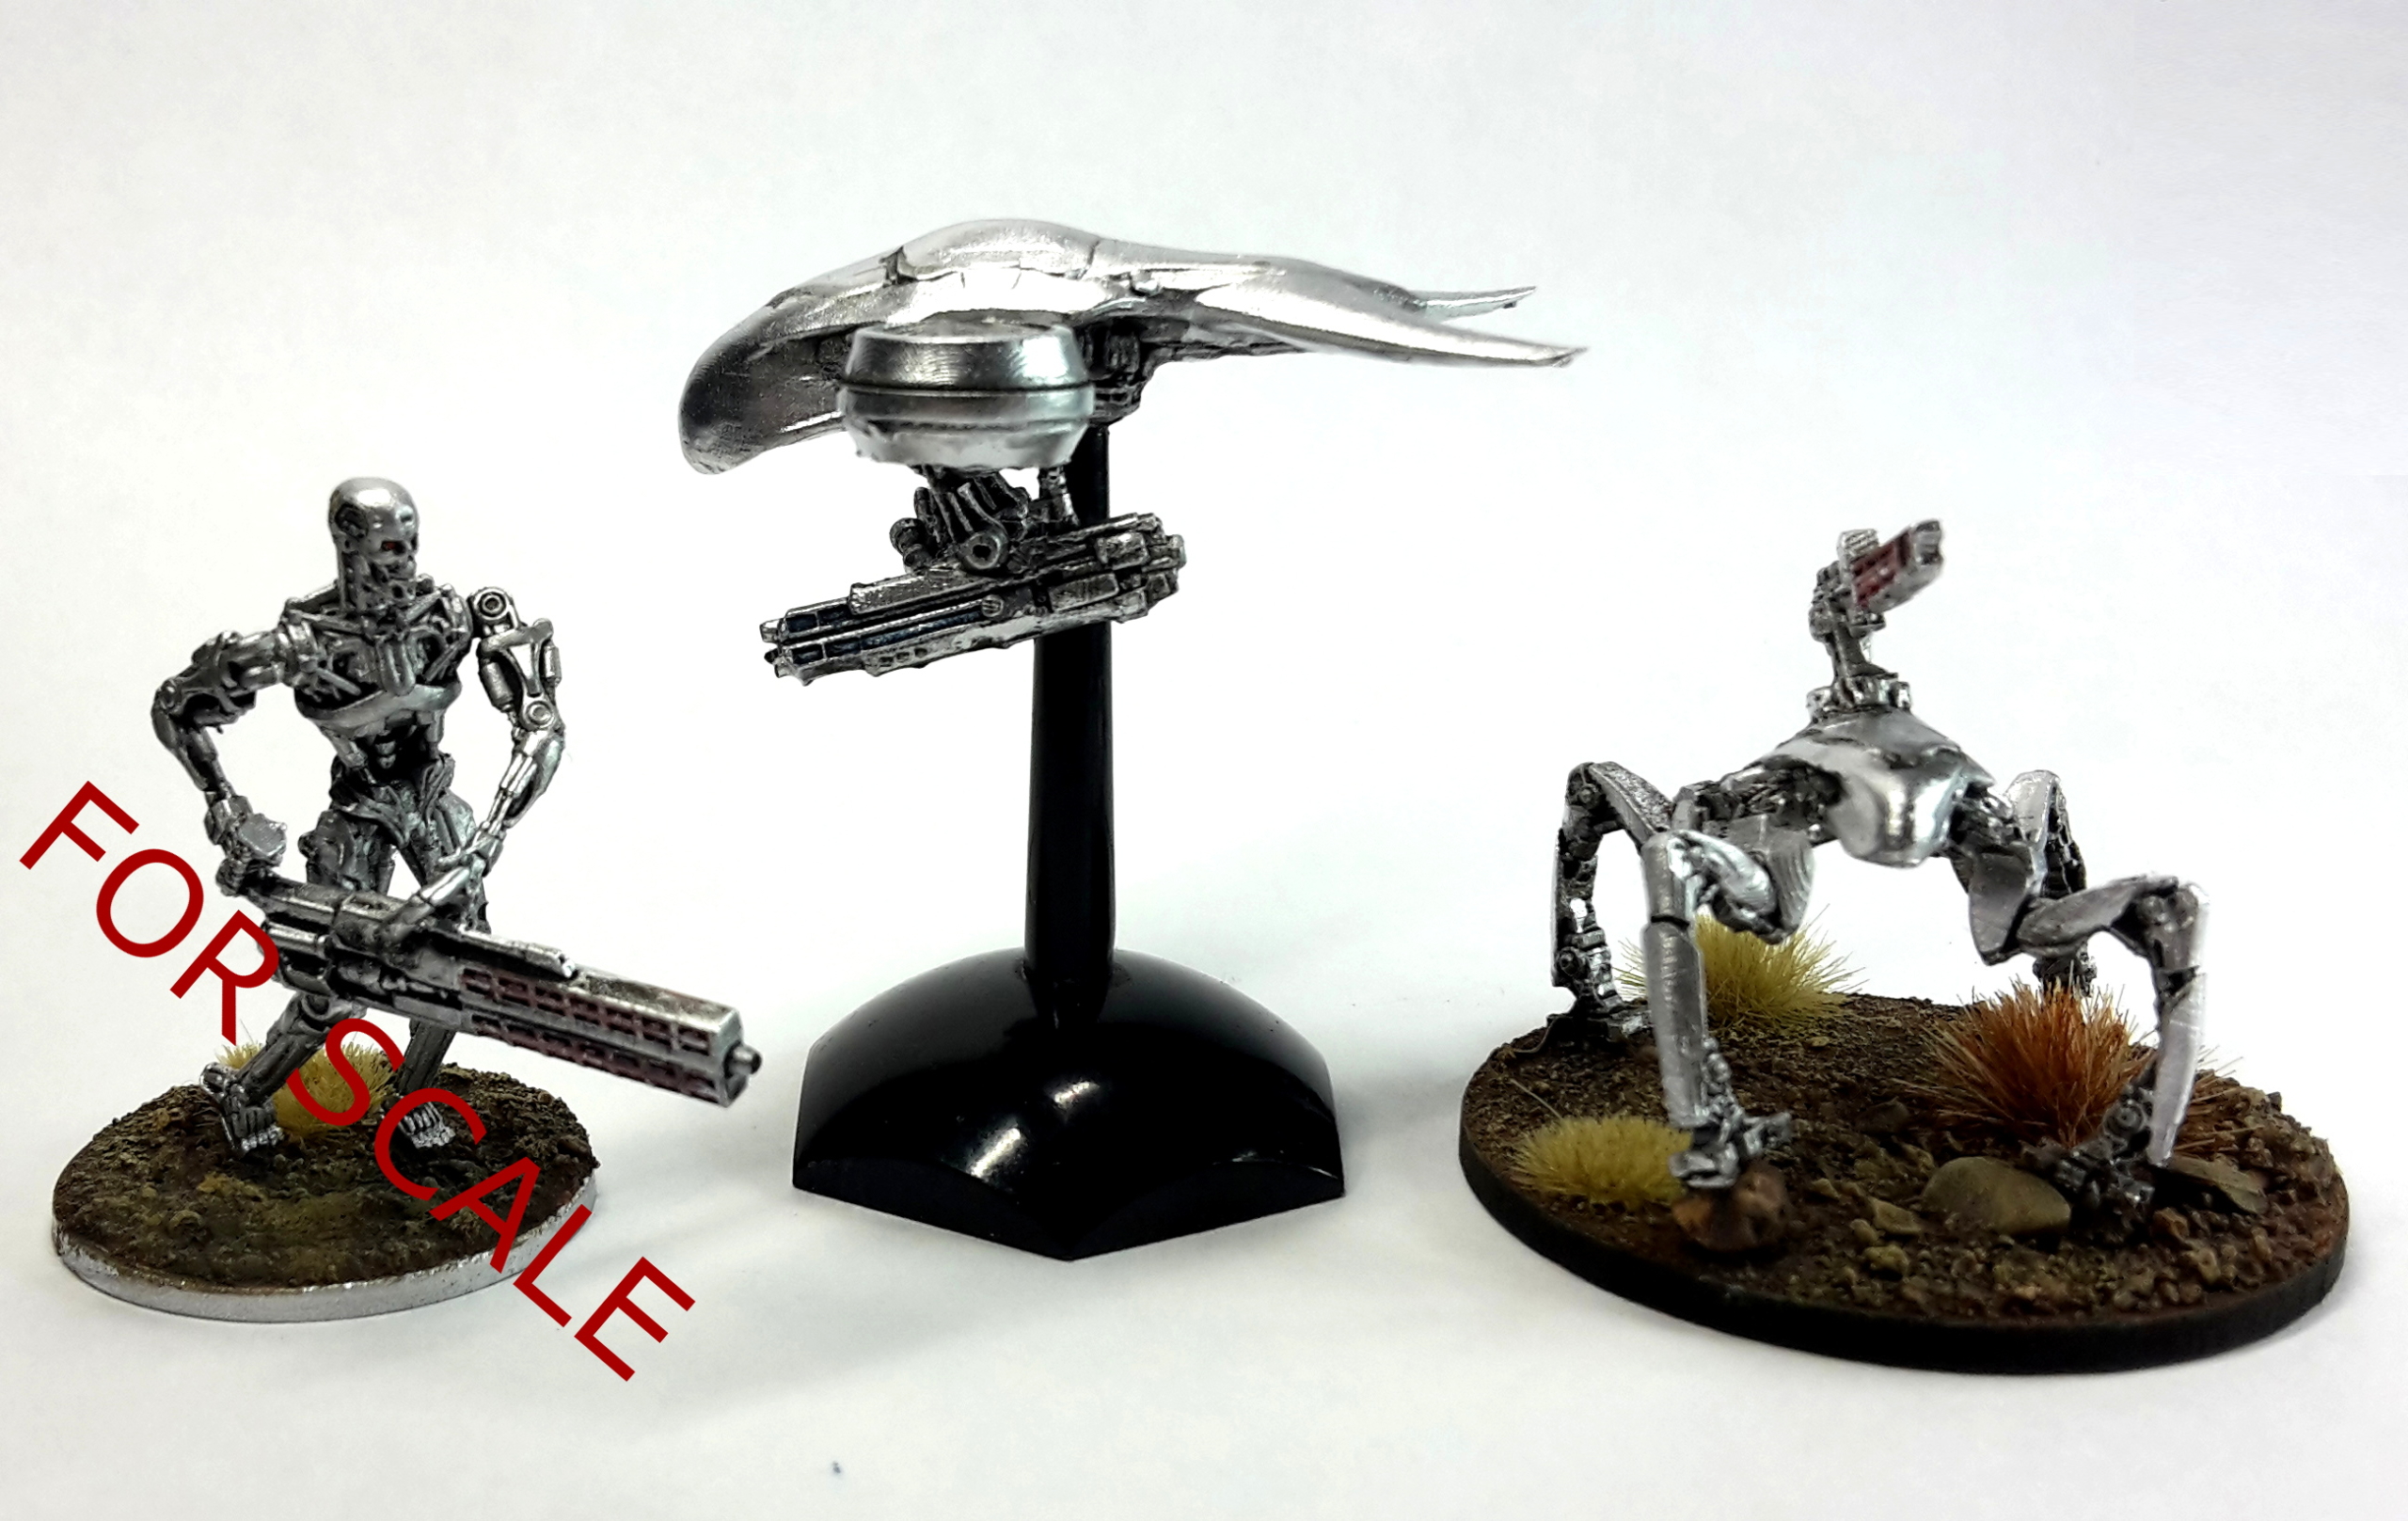 HK-8 Flying Drone aka 'Buzzer' and T-72 Gun Platform aka 'Spider-dog' set for Terminator Genisys The Miniatures Game by River Horse